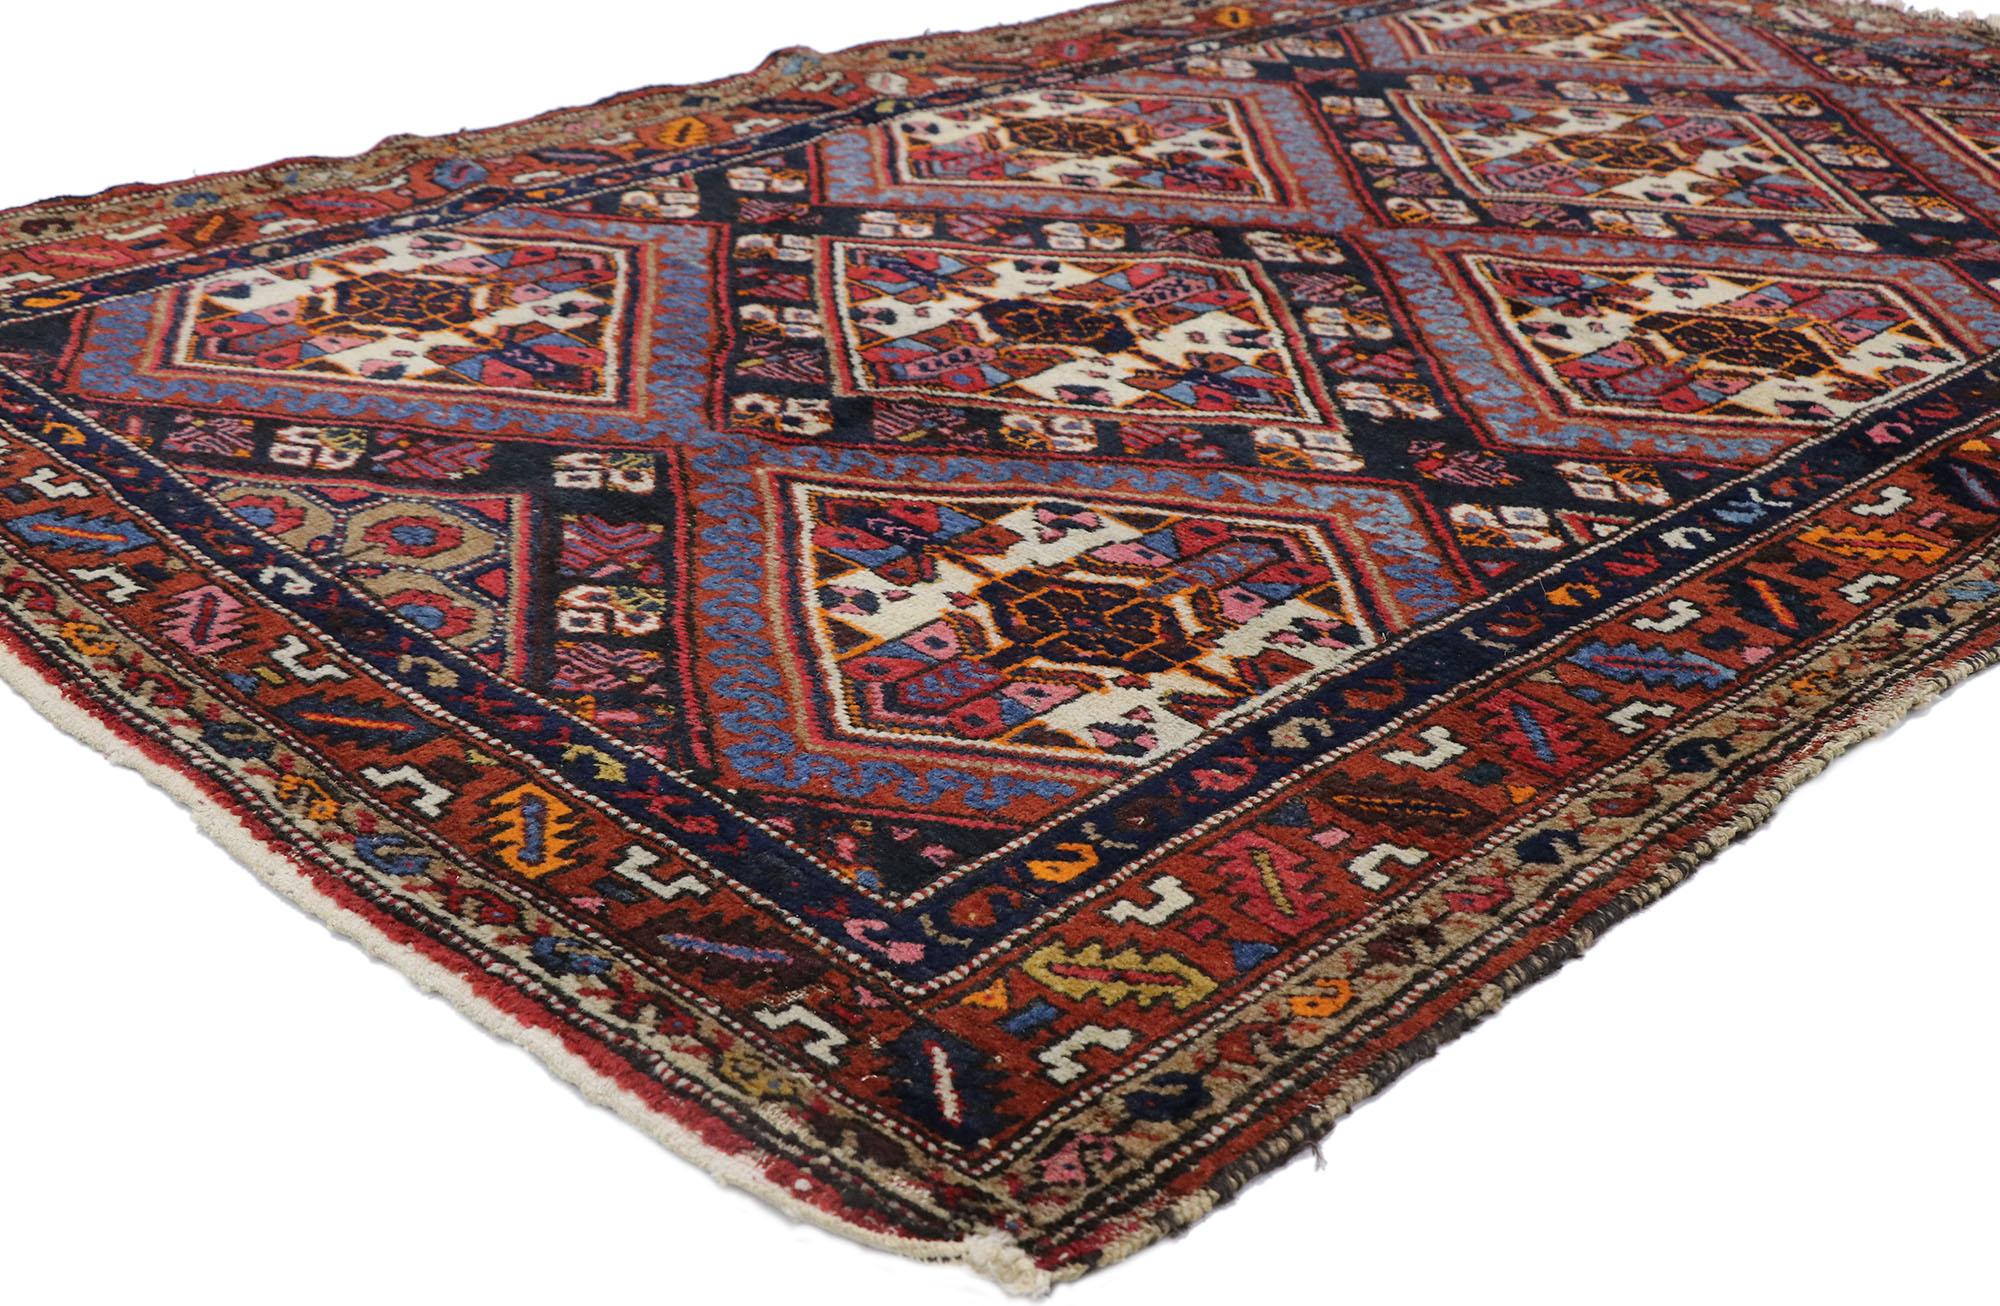 78032 Vintage Persian Hamadan rug with Tribal Style 04'04 x 06'05. Full of tiny details and a bold expressive design combined with lively colors and tribal style, this hand-knotted wool vintage Persian Hamadan rug is a captivating vision of woven